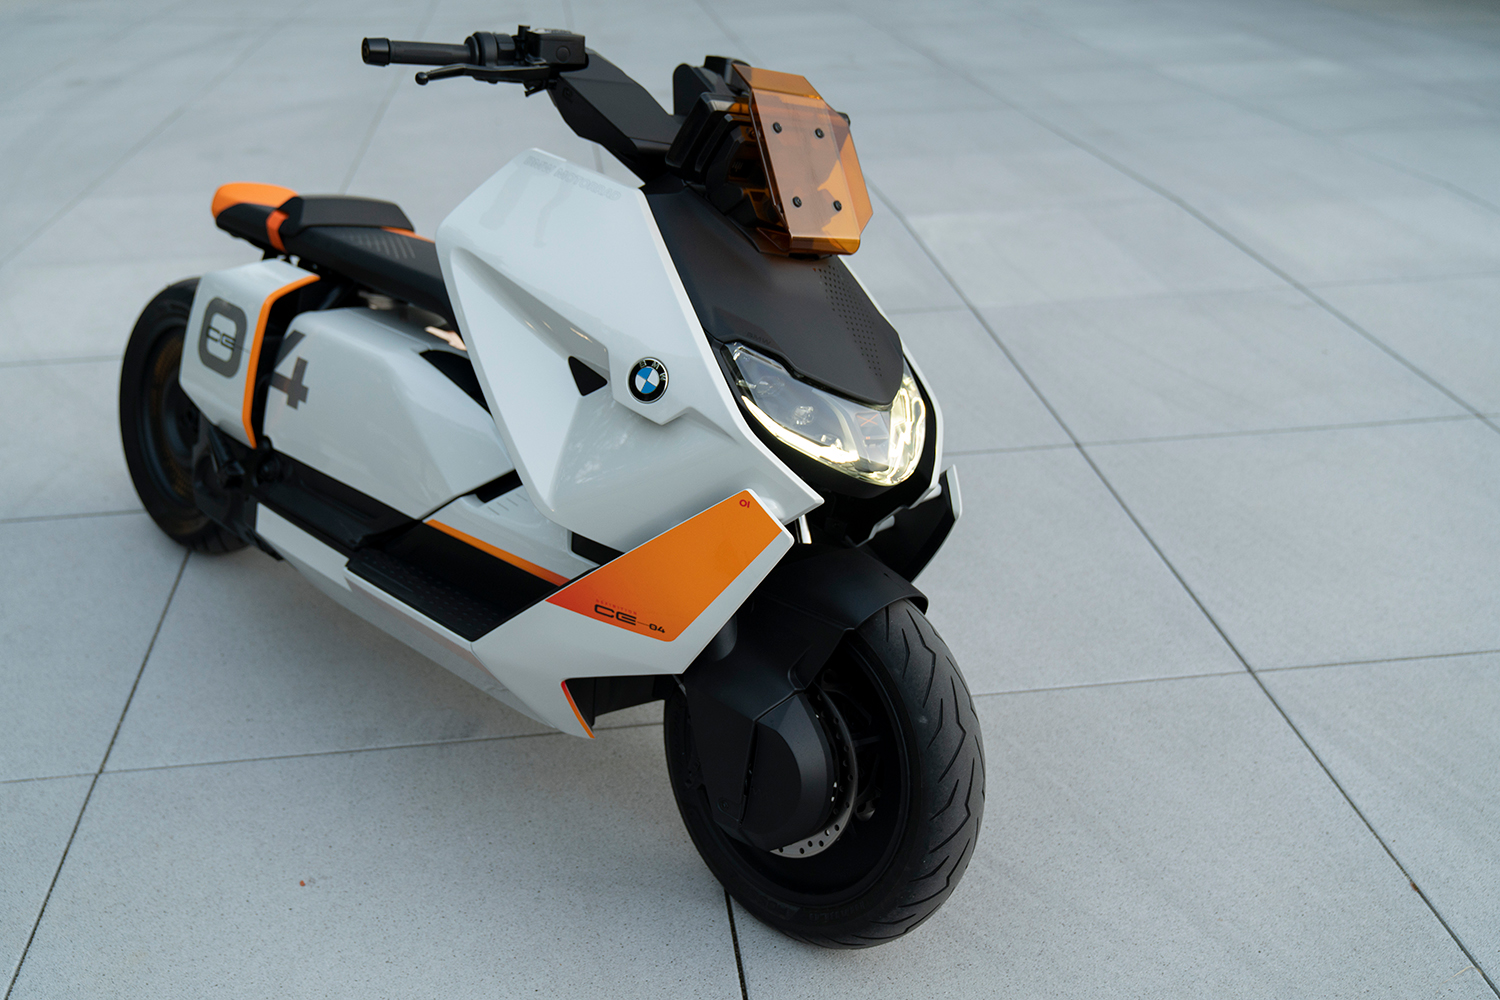 BMW CE 04 - Markus Flasch - THE PACK - Electric Motorcycle News